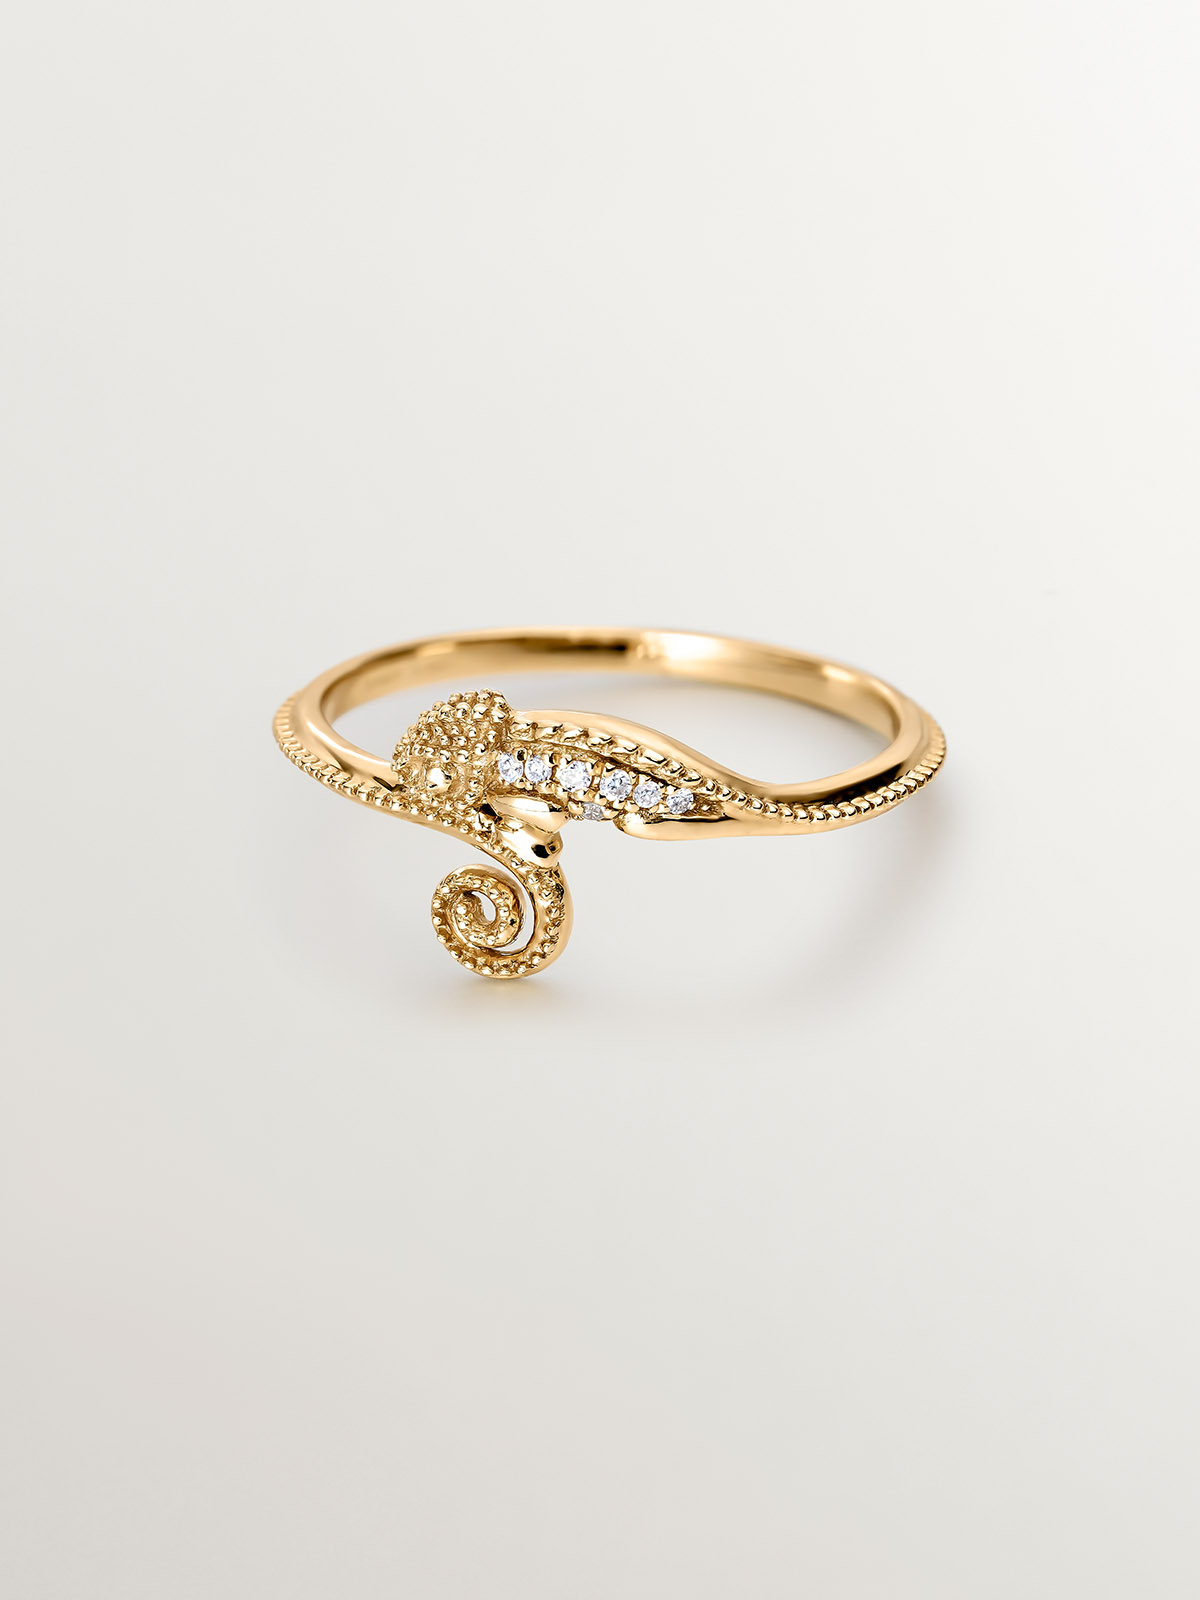 18K yellow gold ring with chameleon and diamonds